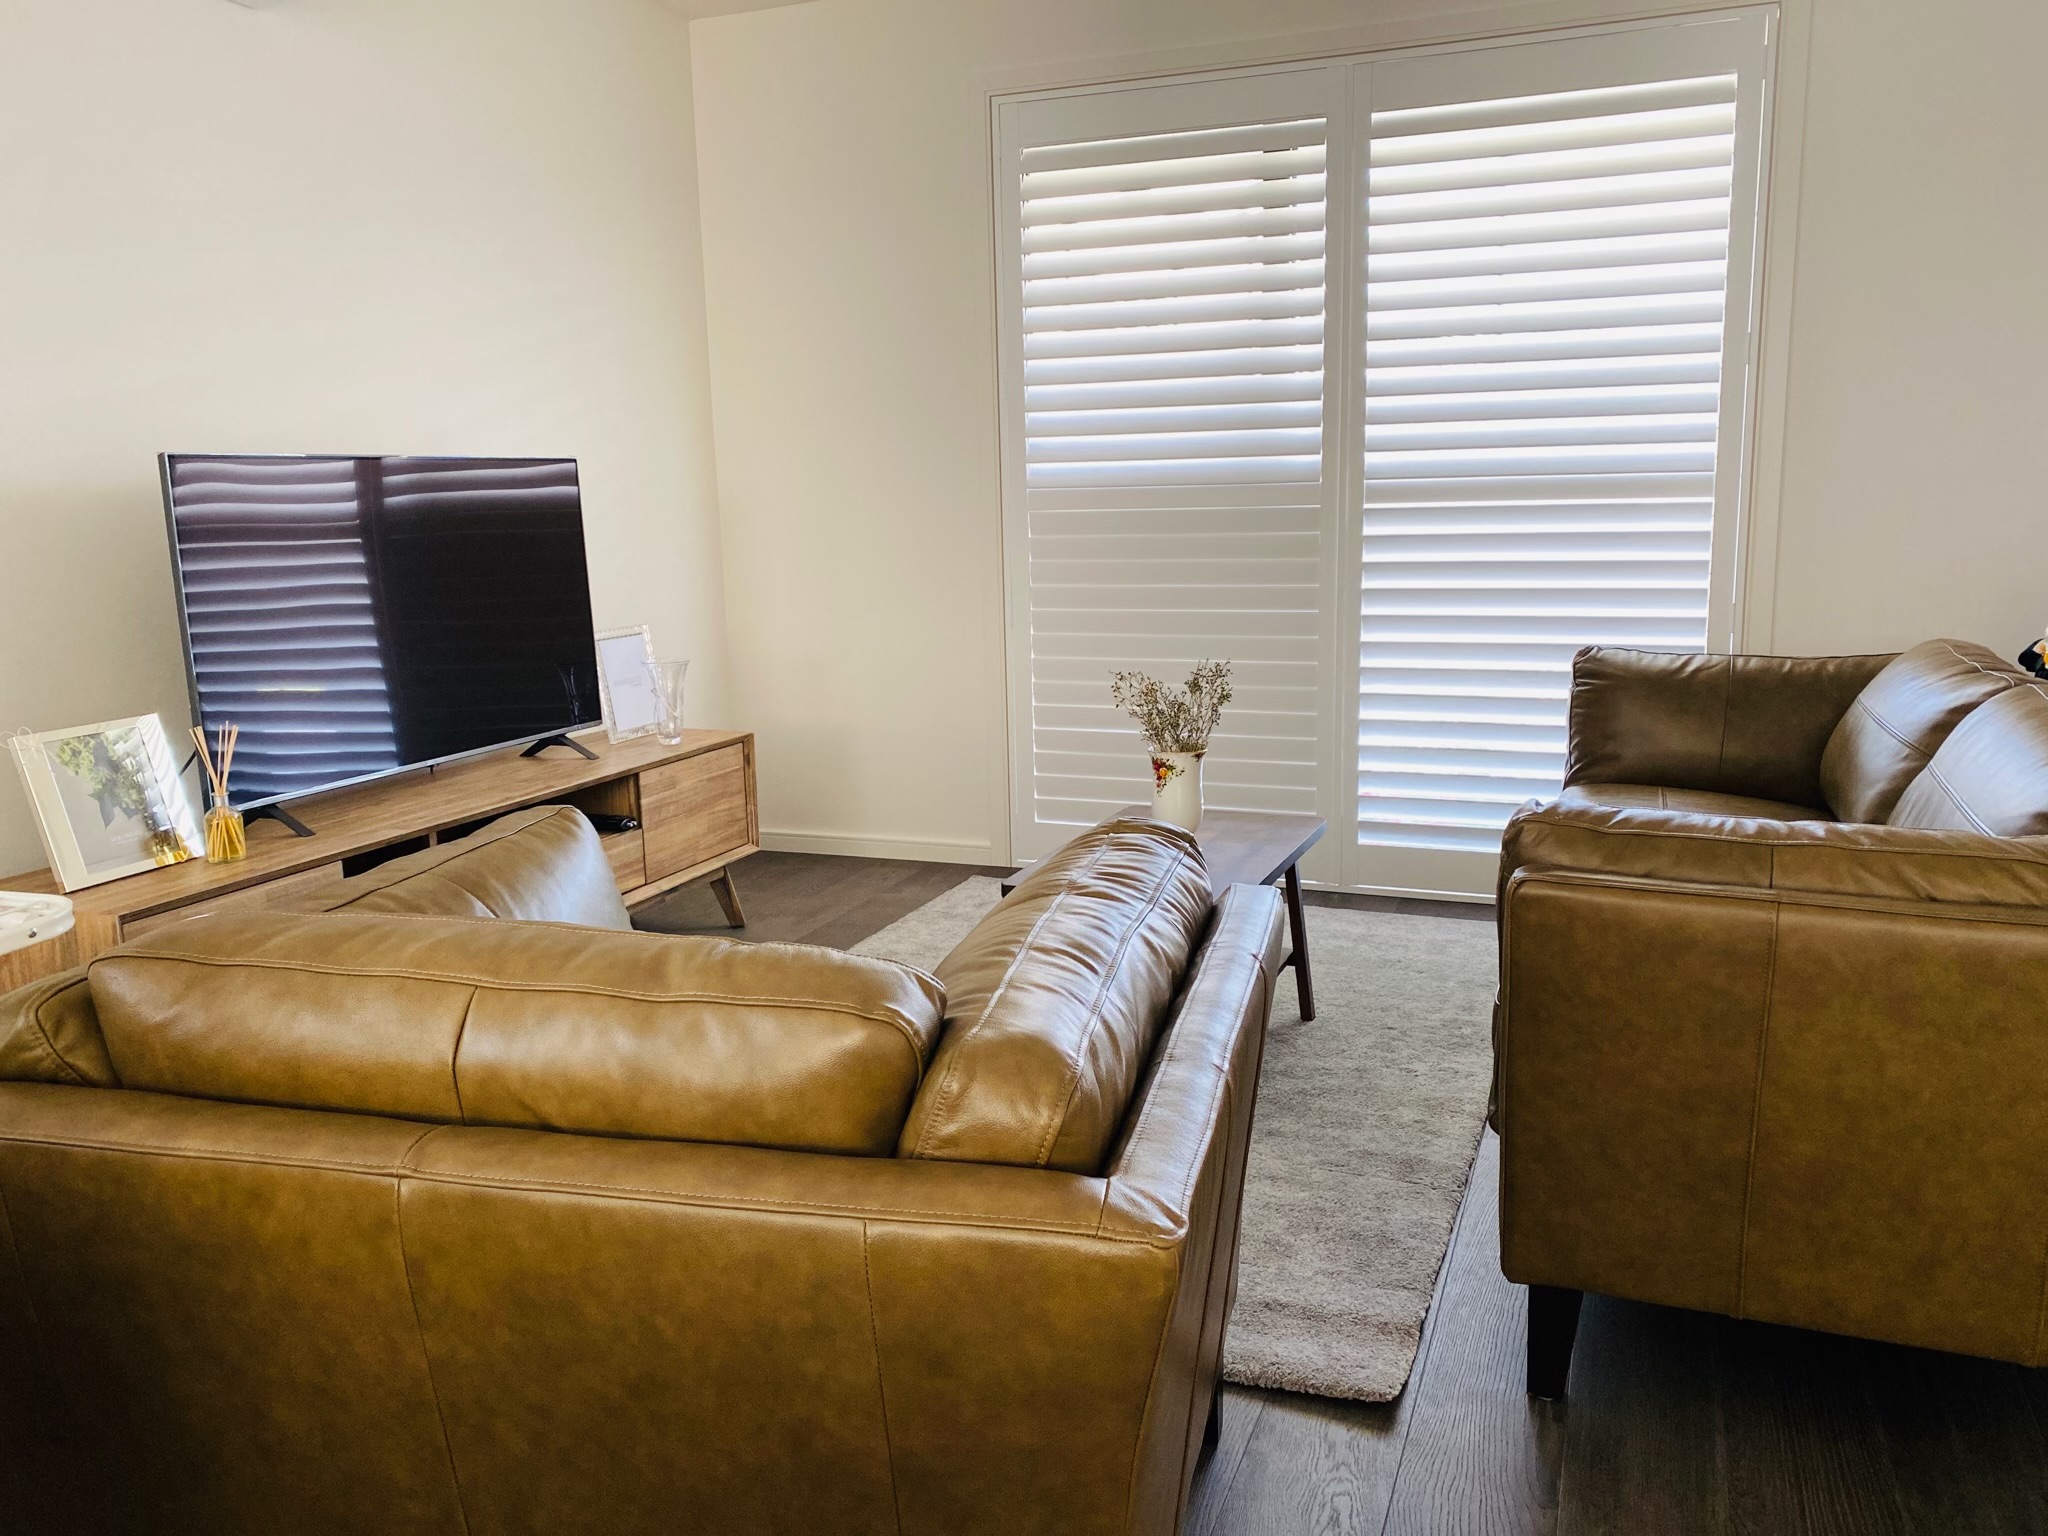 Extra Large Plantation Shutters for a featured living room window in Blackburn